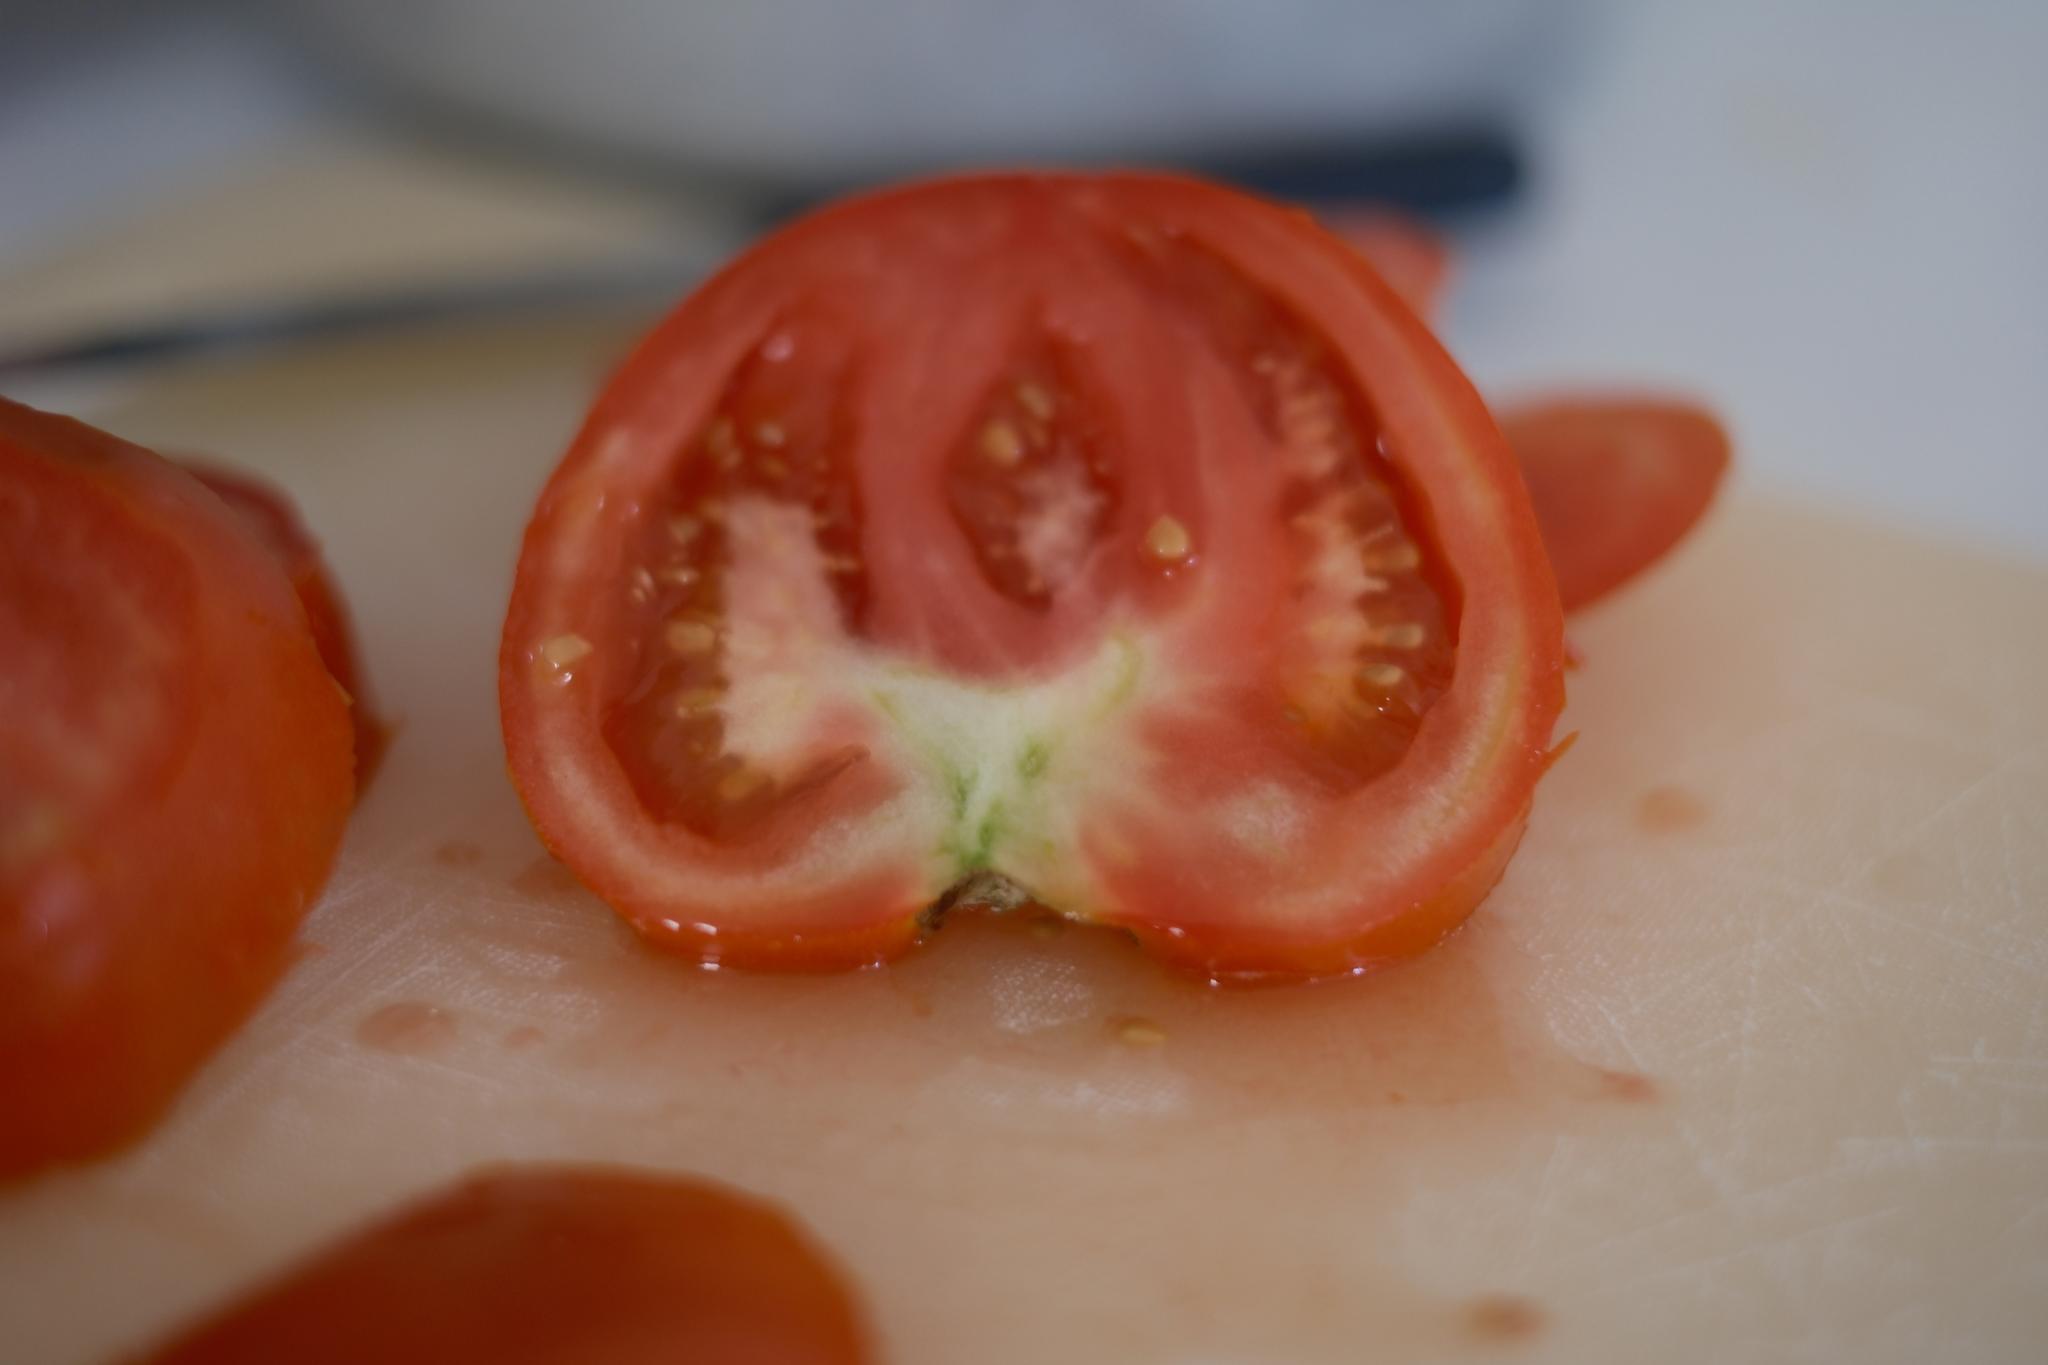 A halved tomato on a cutting board, with visible seeds and internal structure